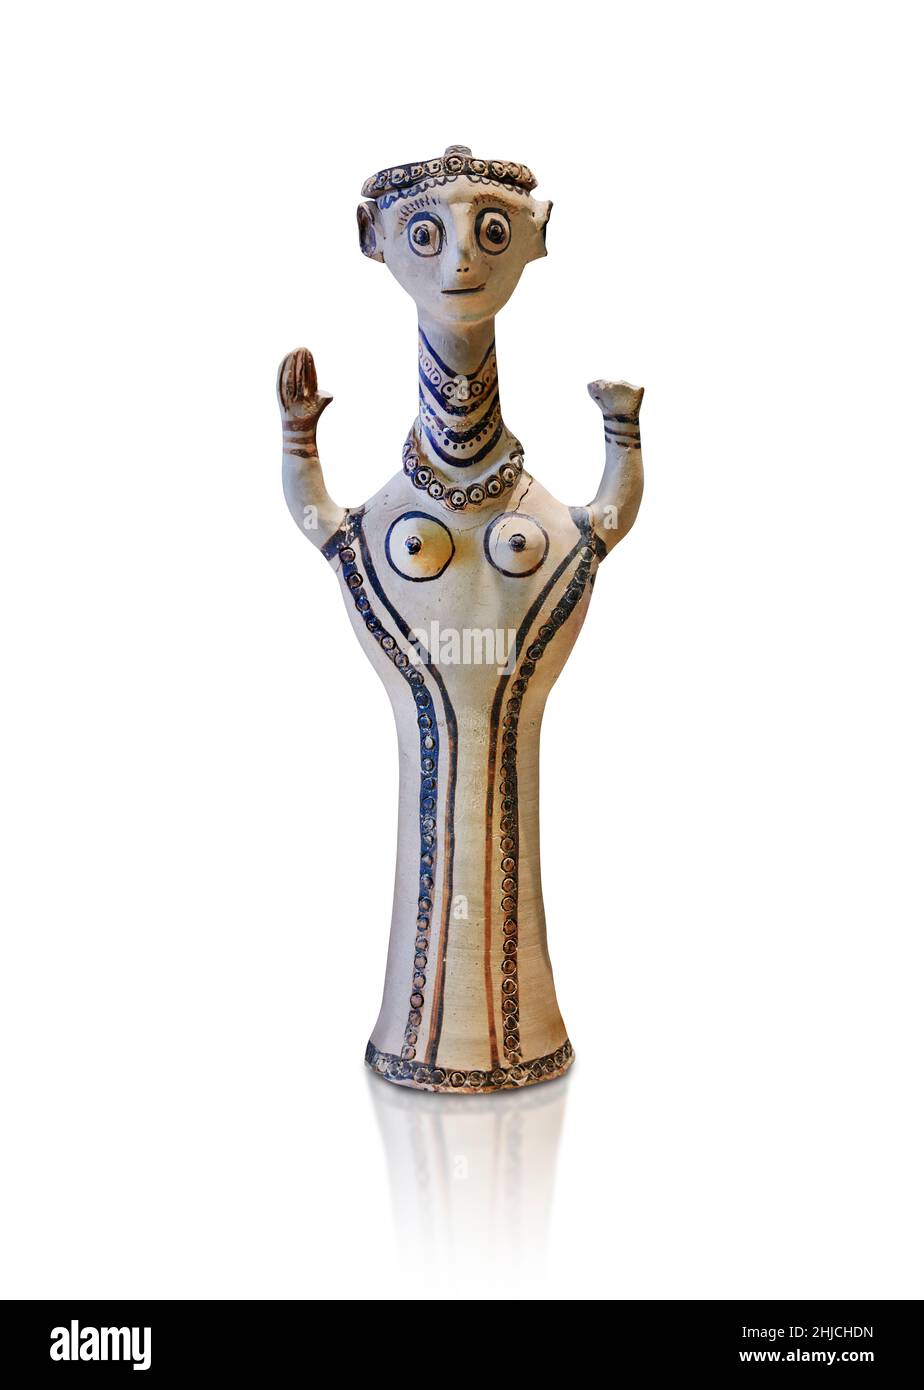 Mycenaean pottery figurine statuette of a goddess made on a pottery wheel, Tiryns Lower Citadel, 12th cent BC. . Against white background. Photographe Stock Photo